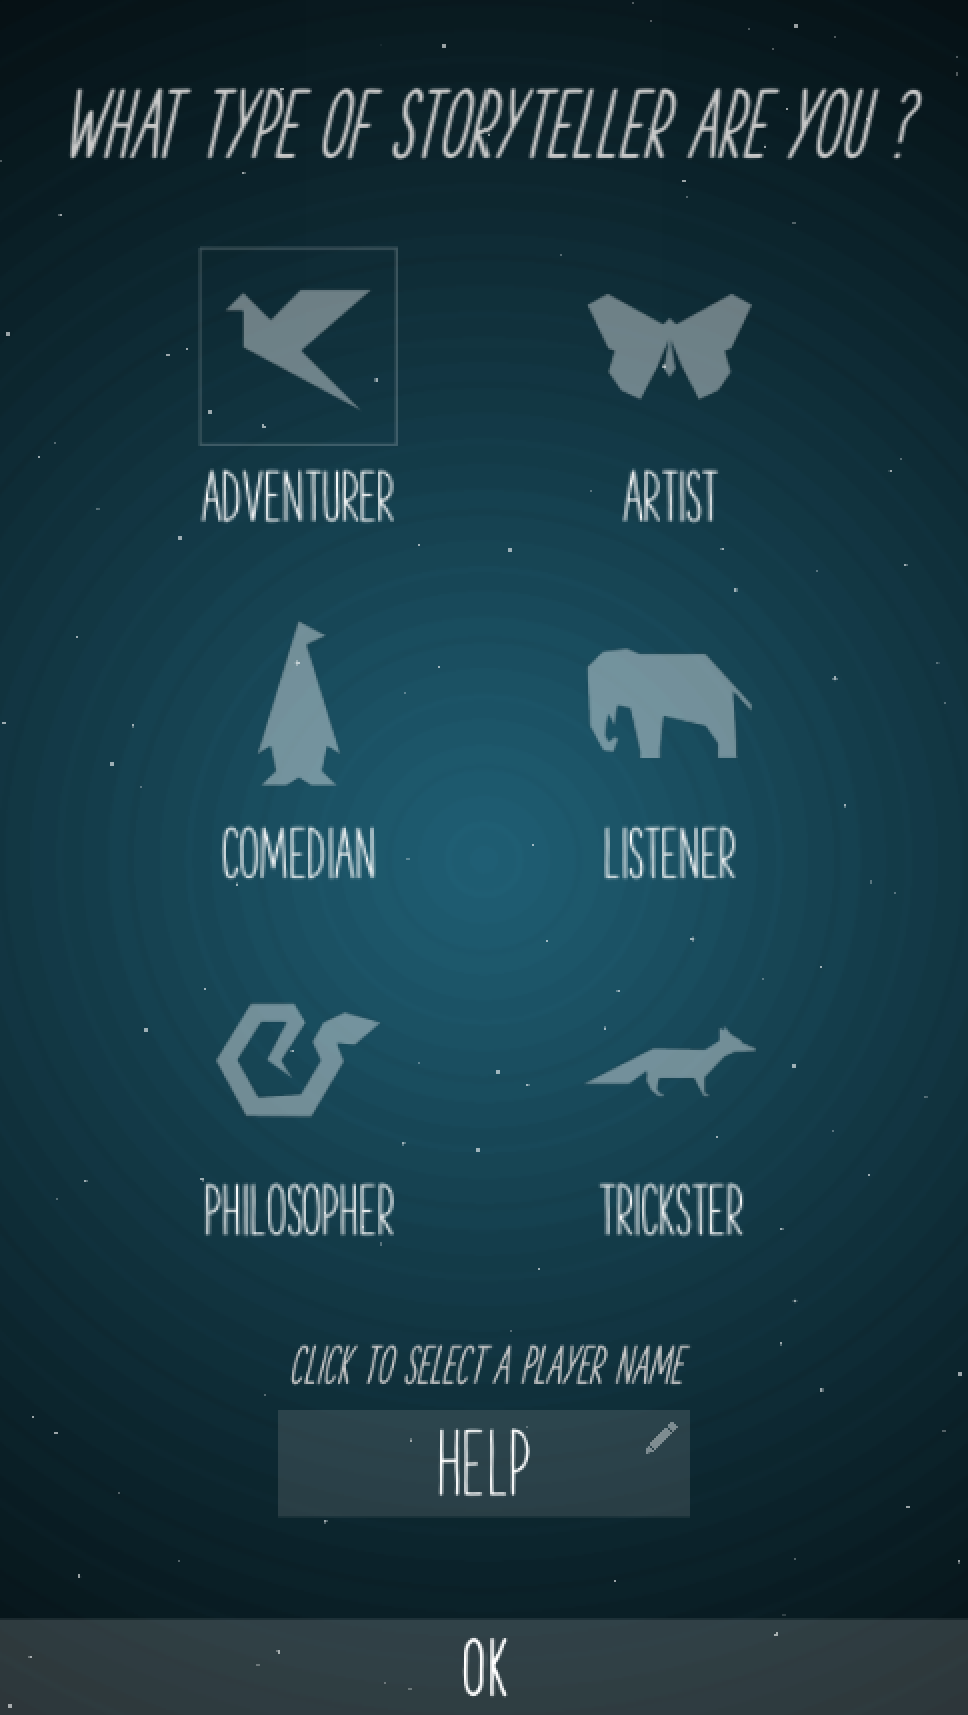 Smartphone screenshot of game interface. Text at the top states 'What type of storyteller are you?' with options below including 'Adventurer', 'Artist', 'Comedian', 'Listener', 'Philosopher', and 'Trickster'. Below that is the text 'Click to select a player name' and a 'Help' and 'OK' button.